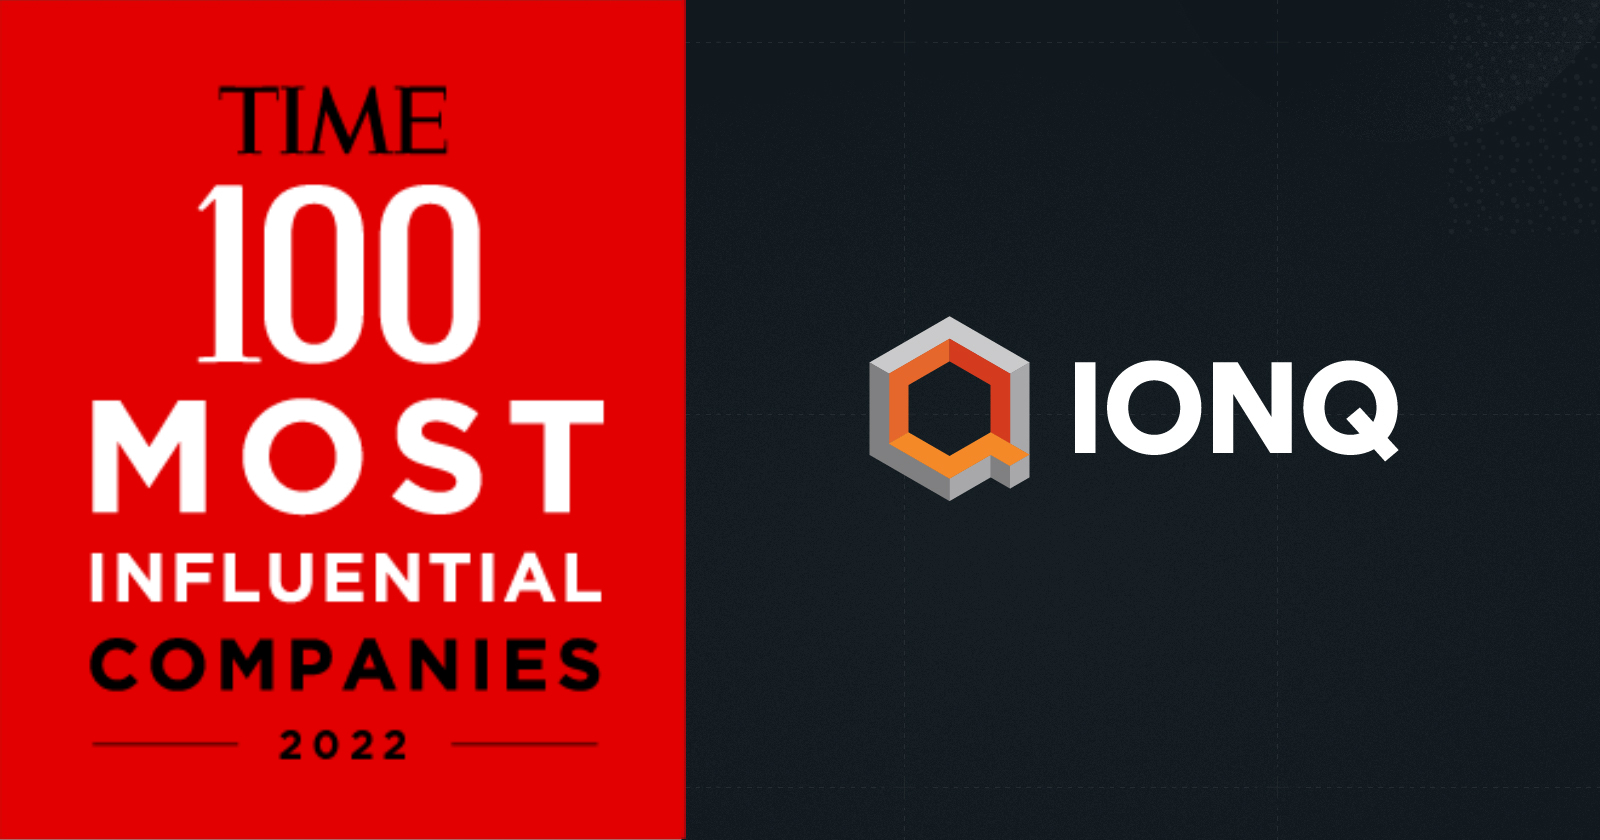 IonQ named to the Time 100 Most Influential Companies of 2022